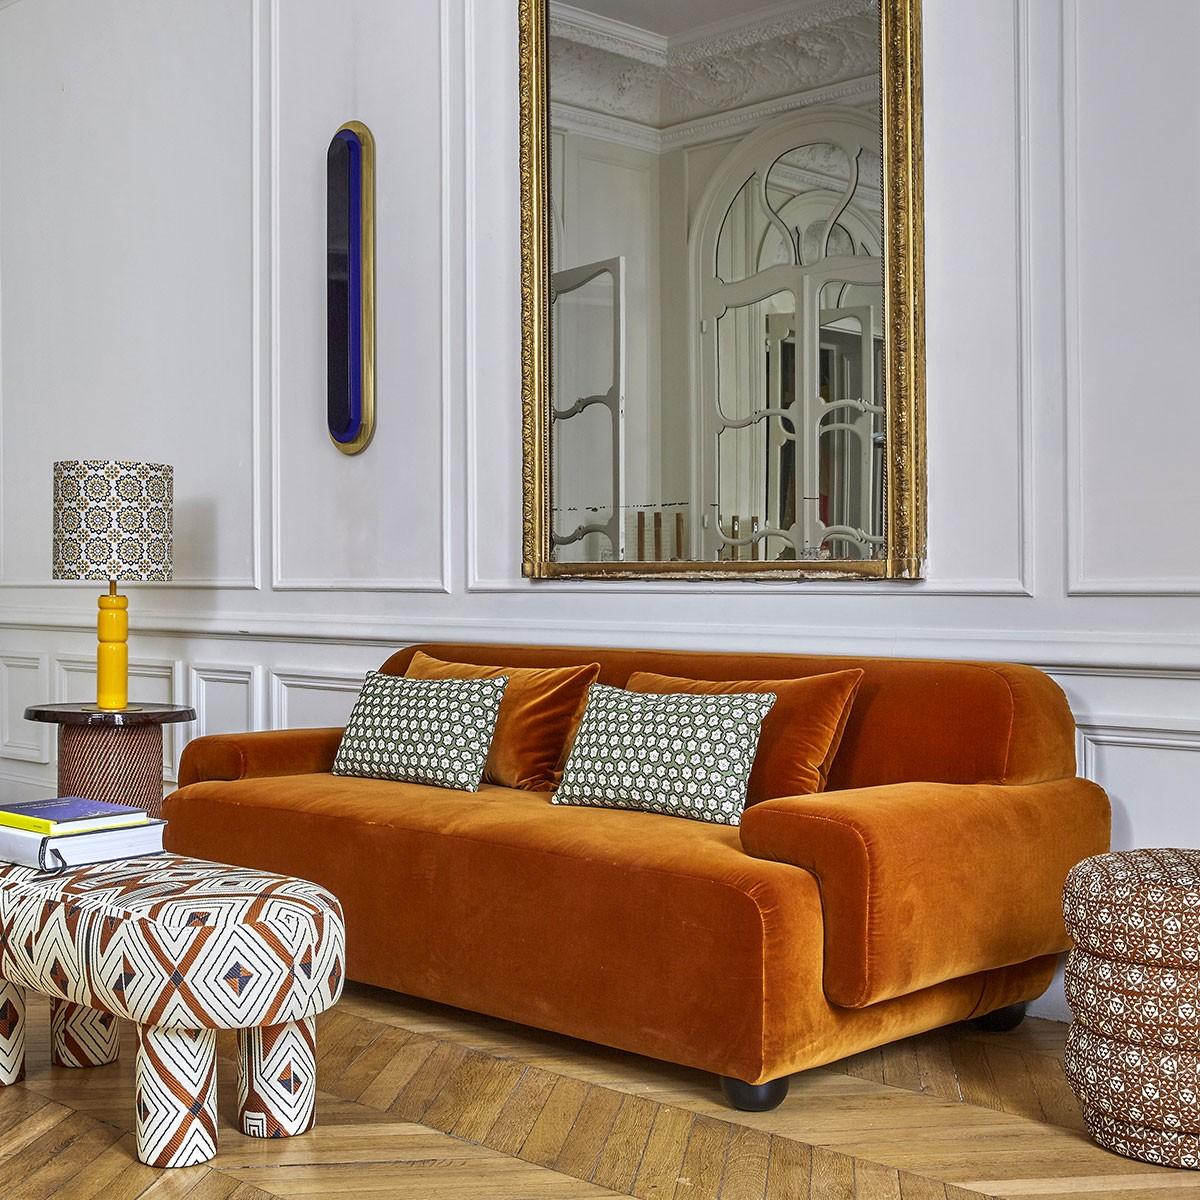 Popus Editions Lena 2.5 Seater Sofa in Bordeaux Como Velvet Upholstery

It looks like it's straight out of a movie, with its generous curves and wide armrests. It is a real invitation to spend long Sundays with the family, comfortably seated in